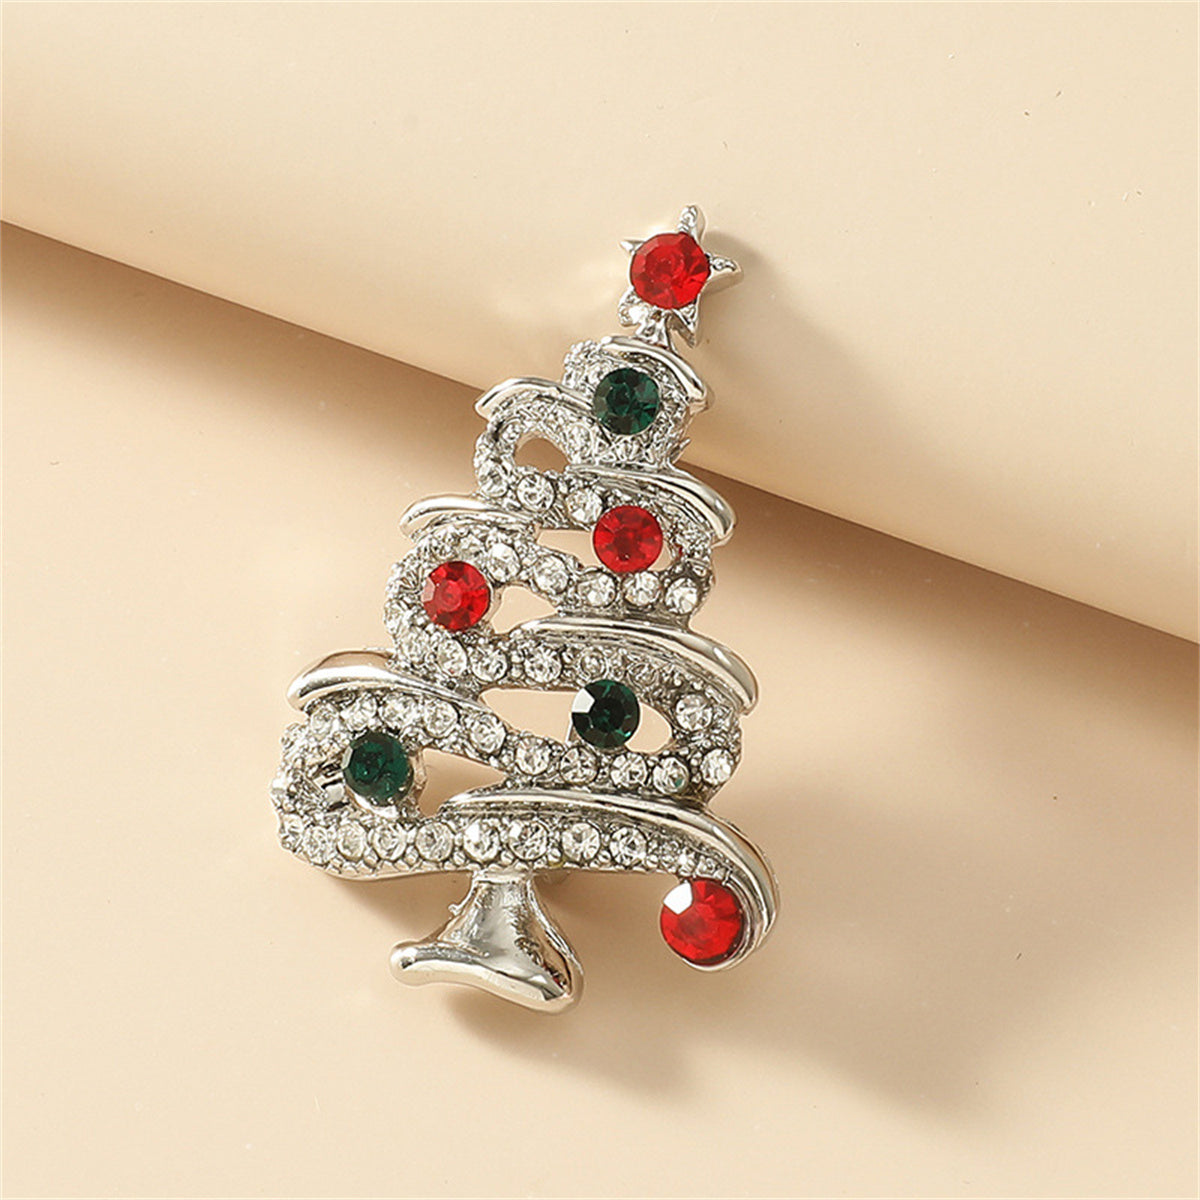 Red & Green Cubic Zirconia Silver-Plated Holiday Tree Brooch